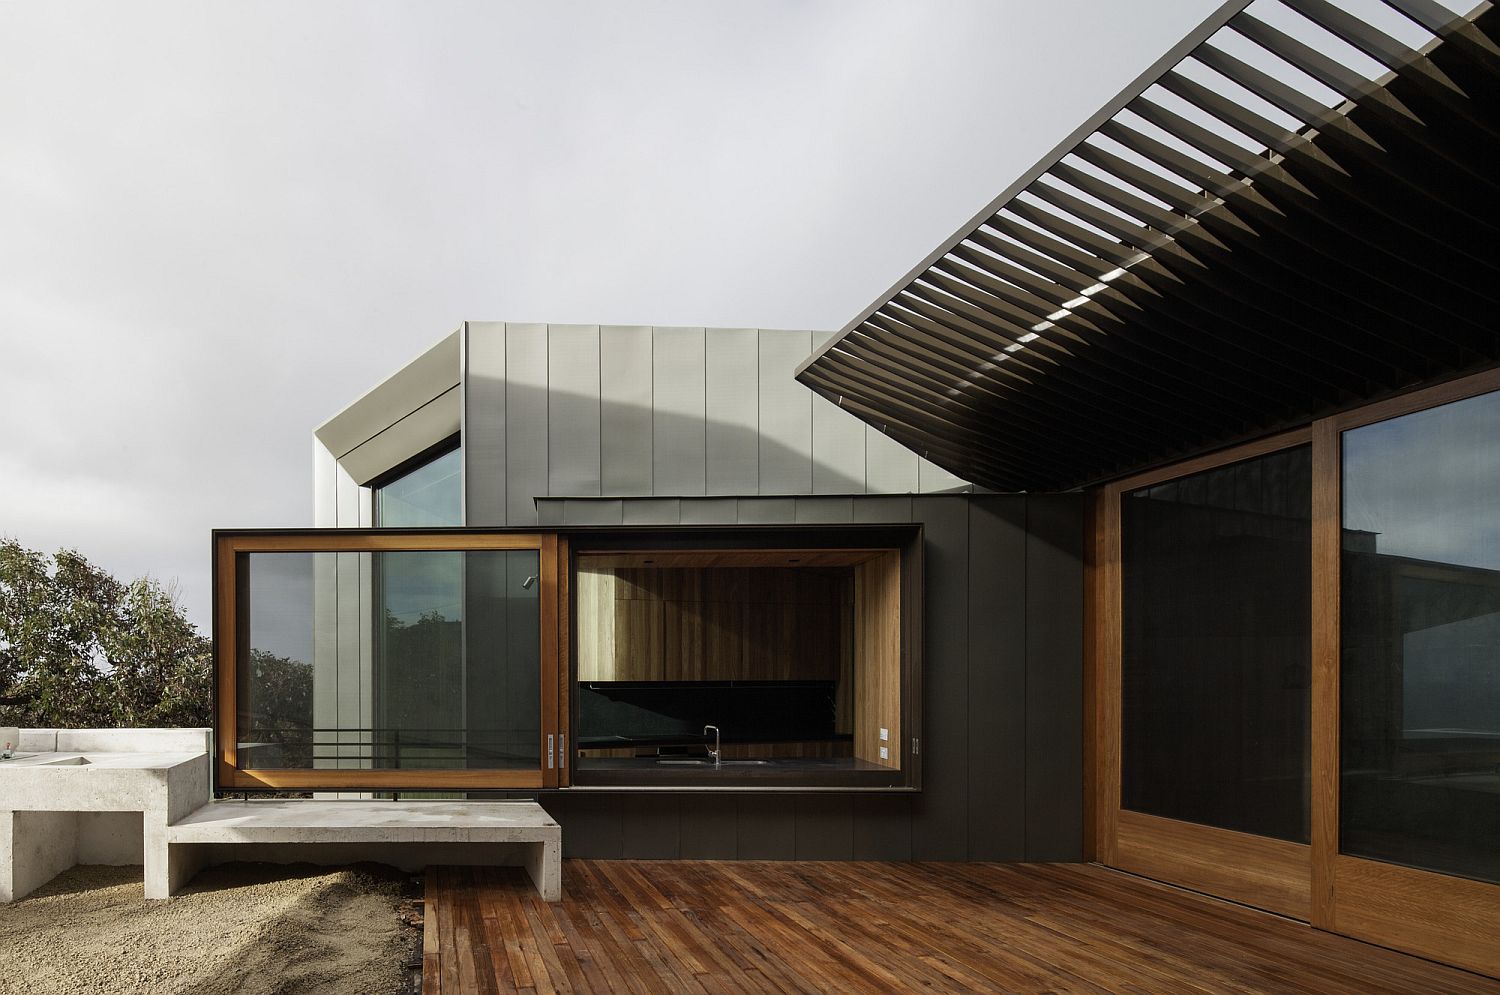 Design of the house feels like scenography with views framed beautifully